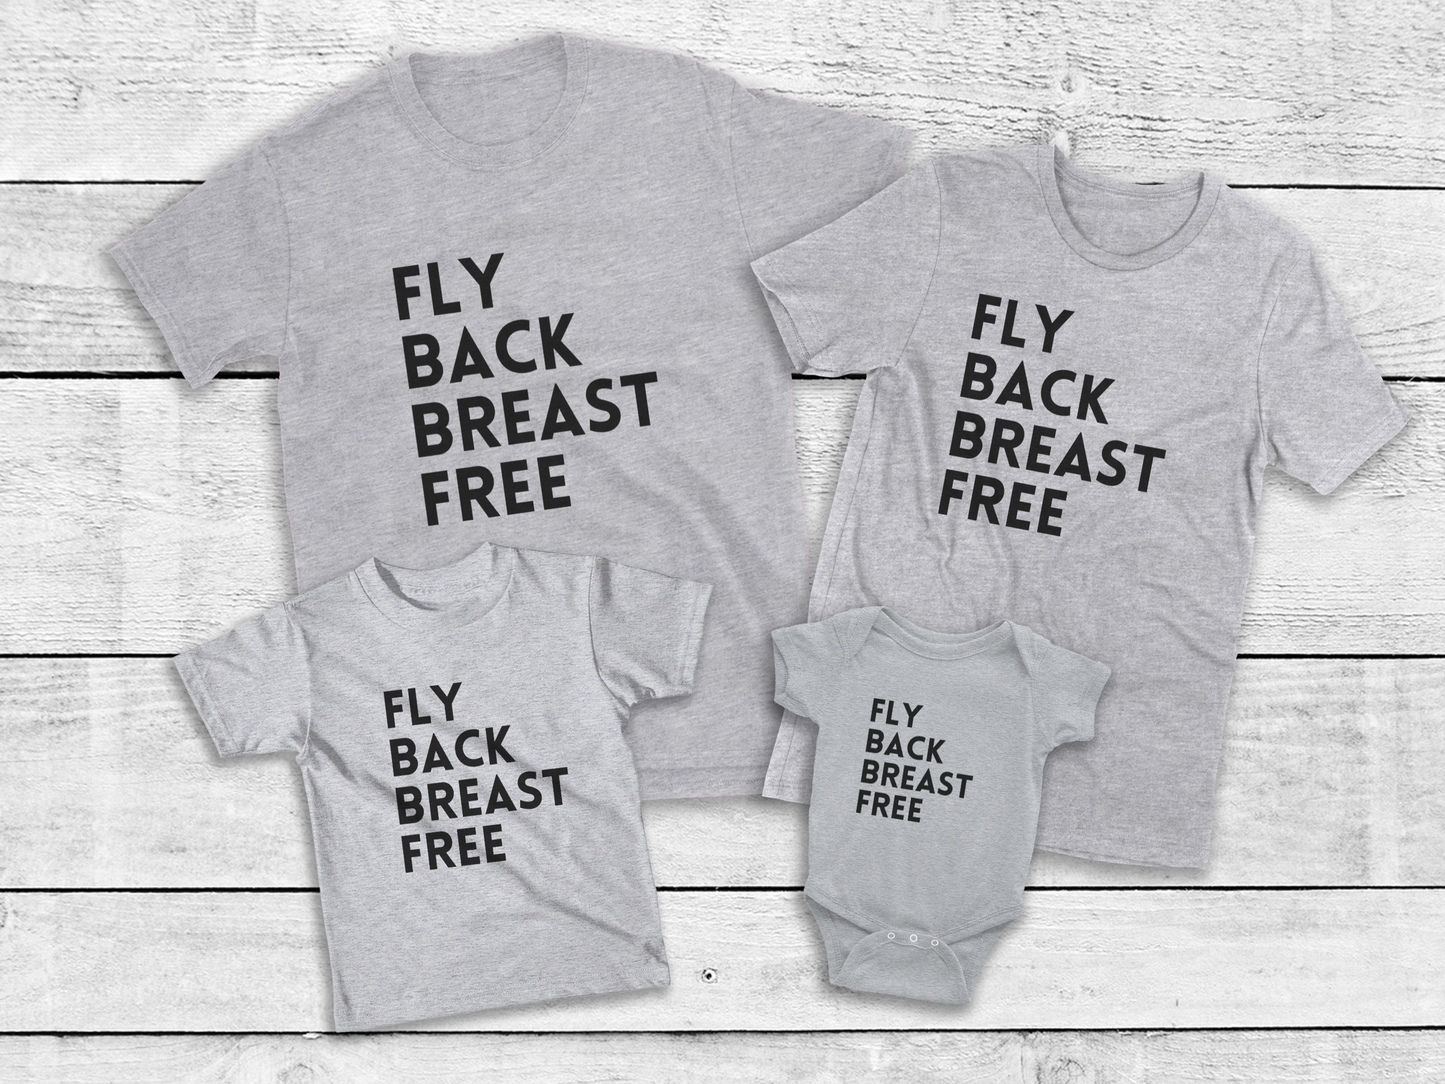 Fly Back Breast Free Adult Unisex T-Shirt